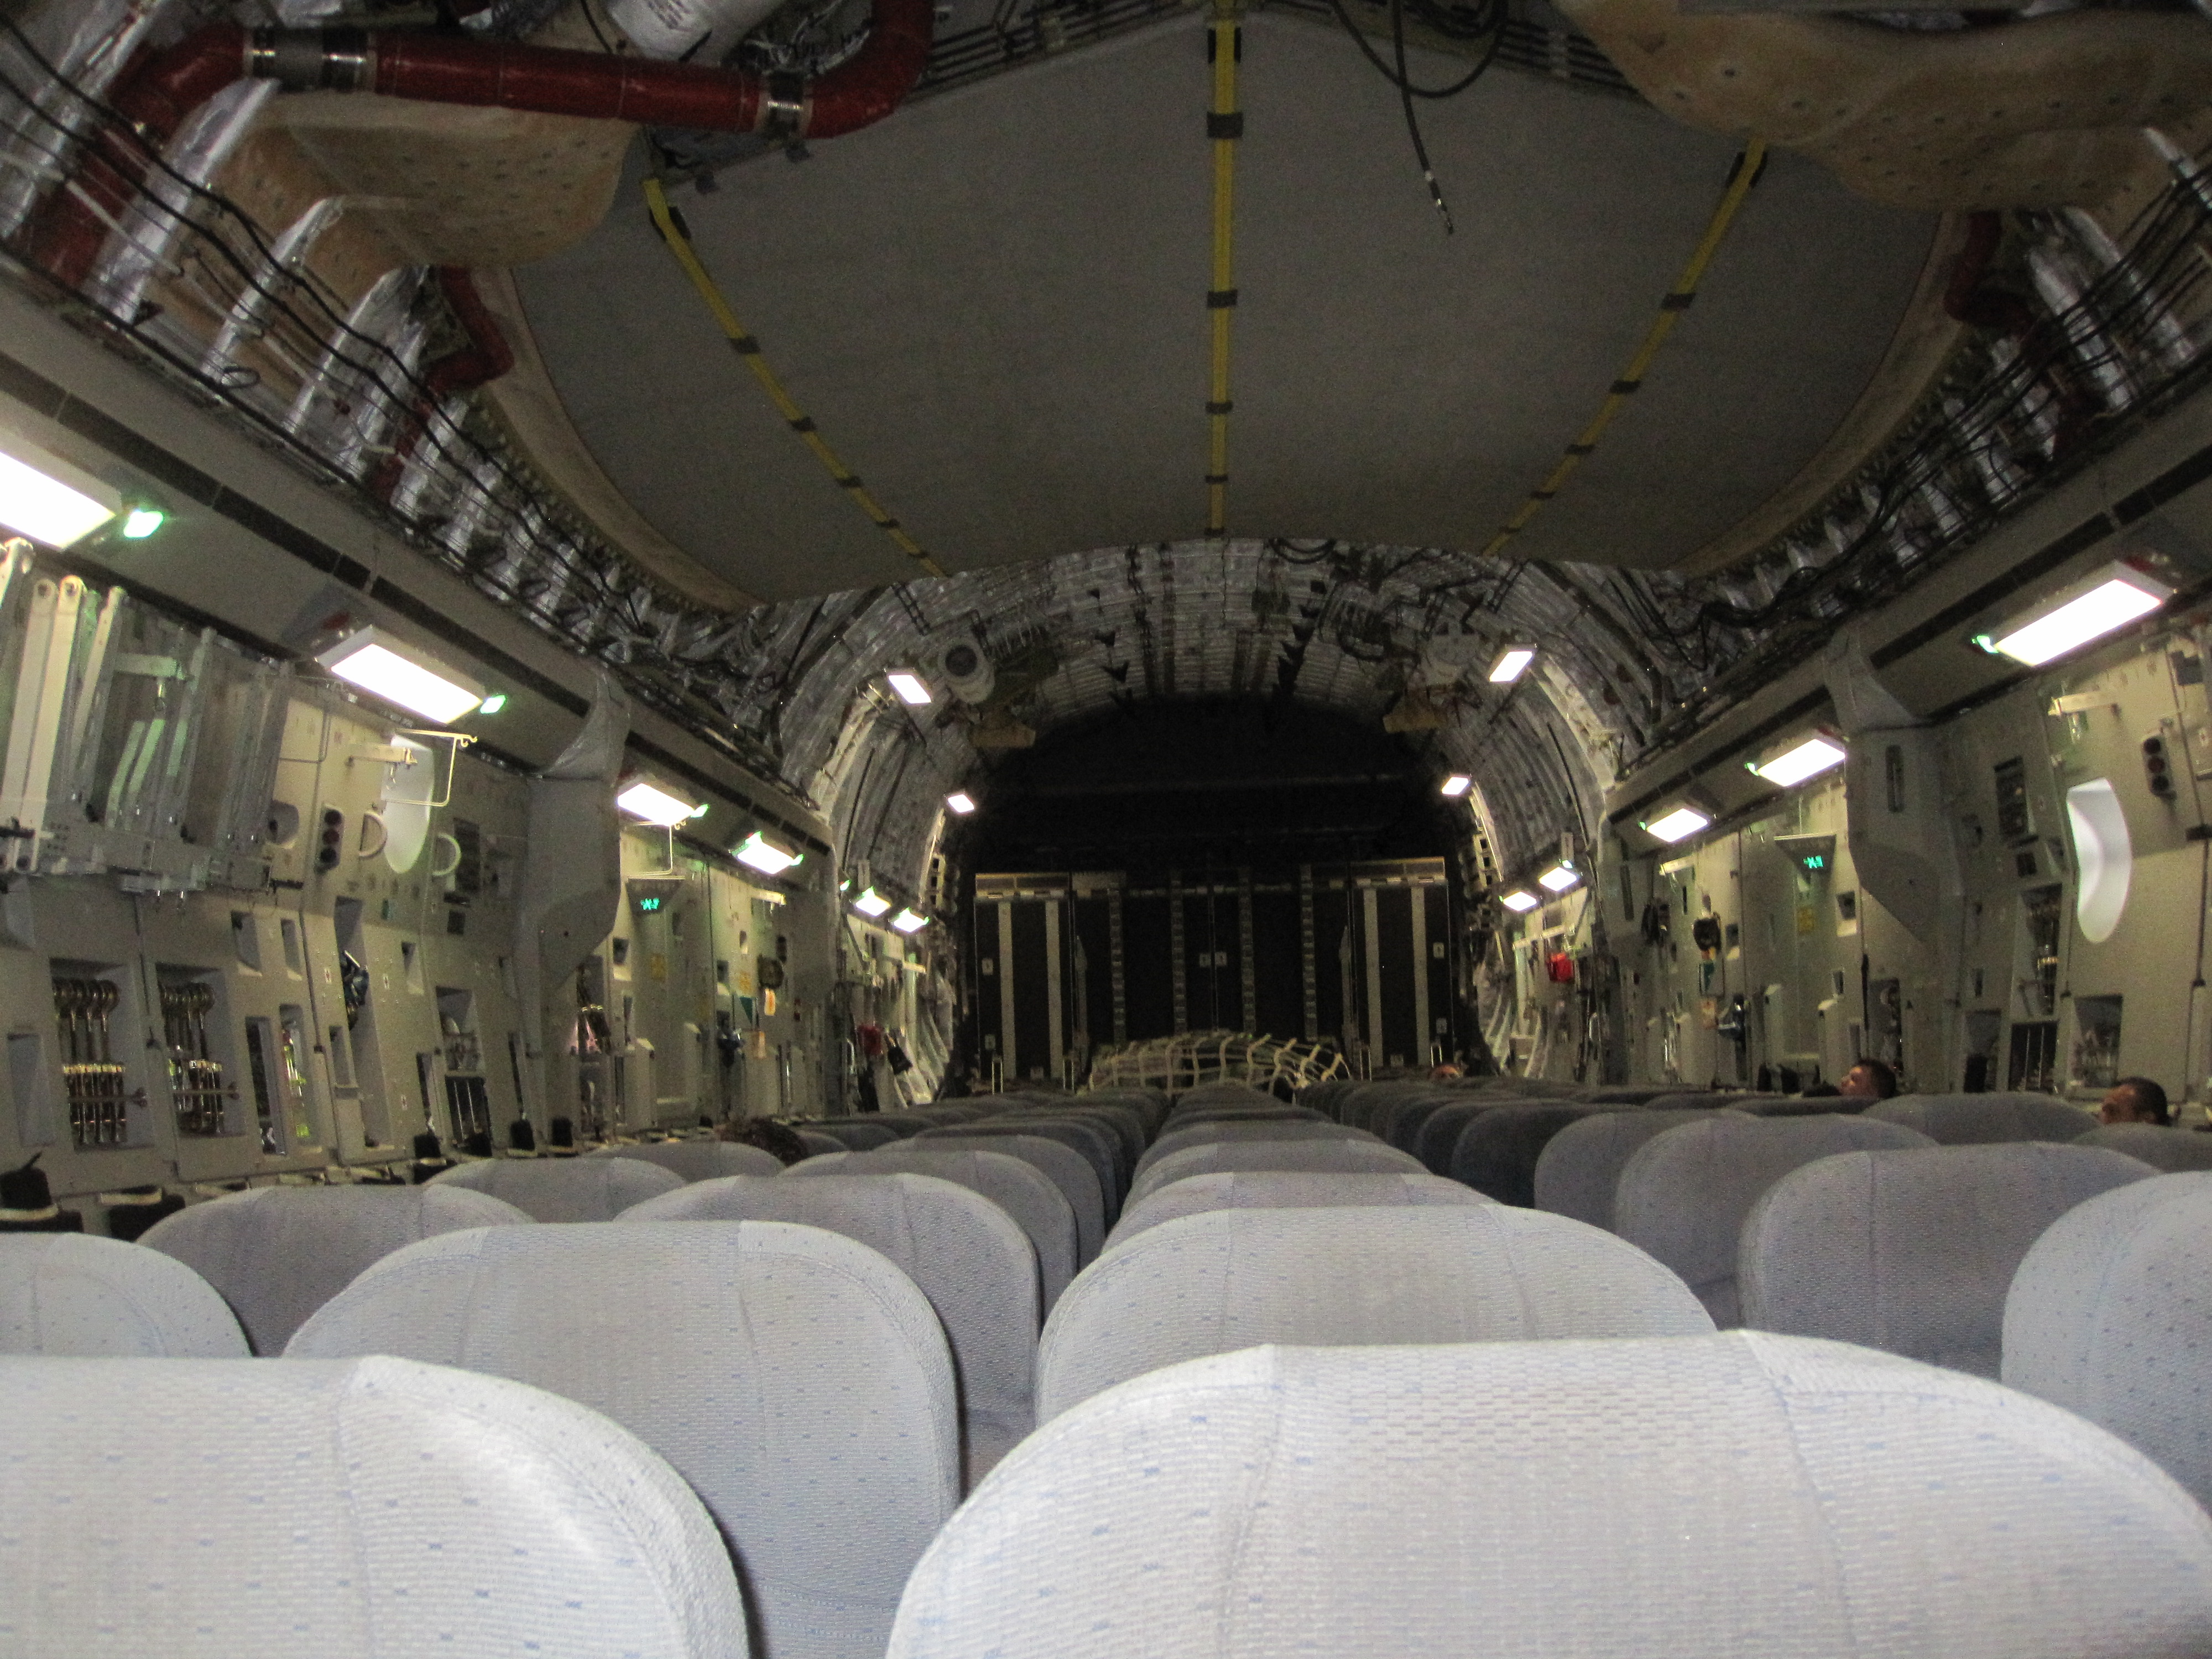  - inside-the-c-17-aircraft